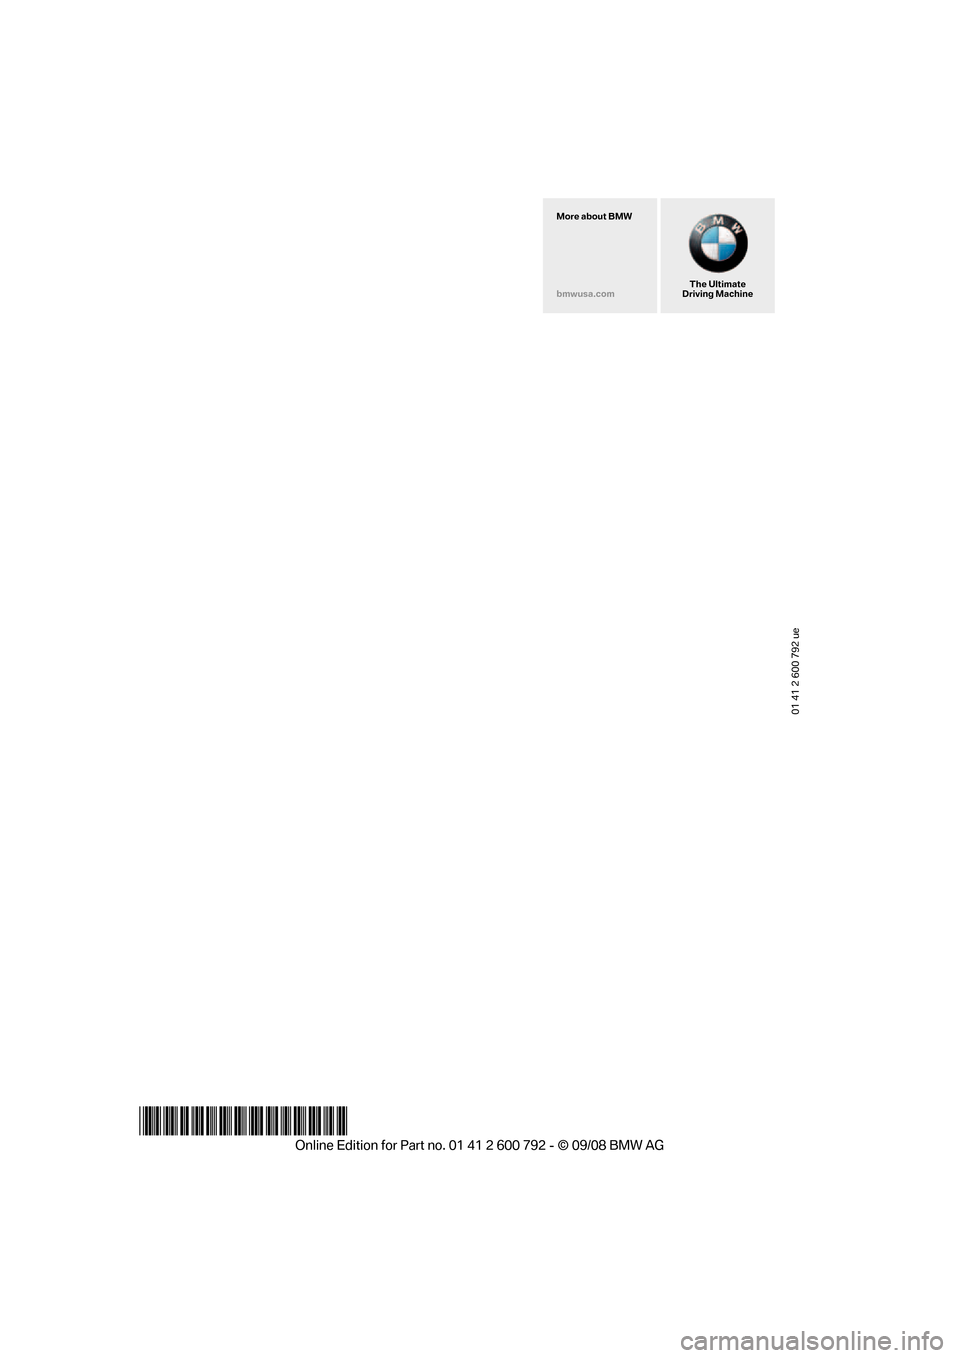 BMW X6M 2009 E71 Owners Manual 01 41 2 600 792 ue
*BL260079200U*
The Ultimate
Driving Machine
More about BMW
bmwusa.com 